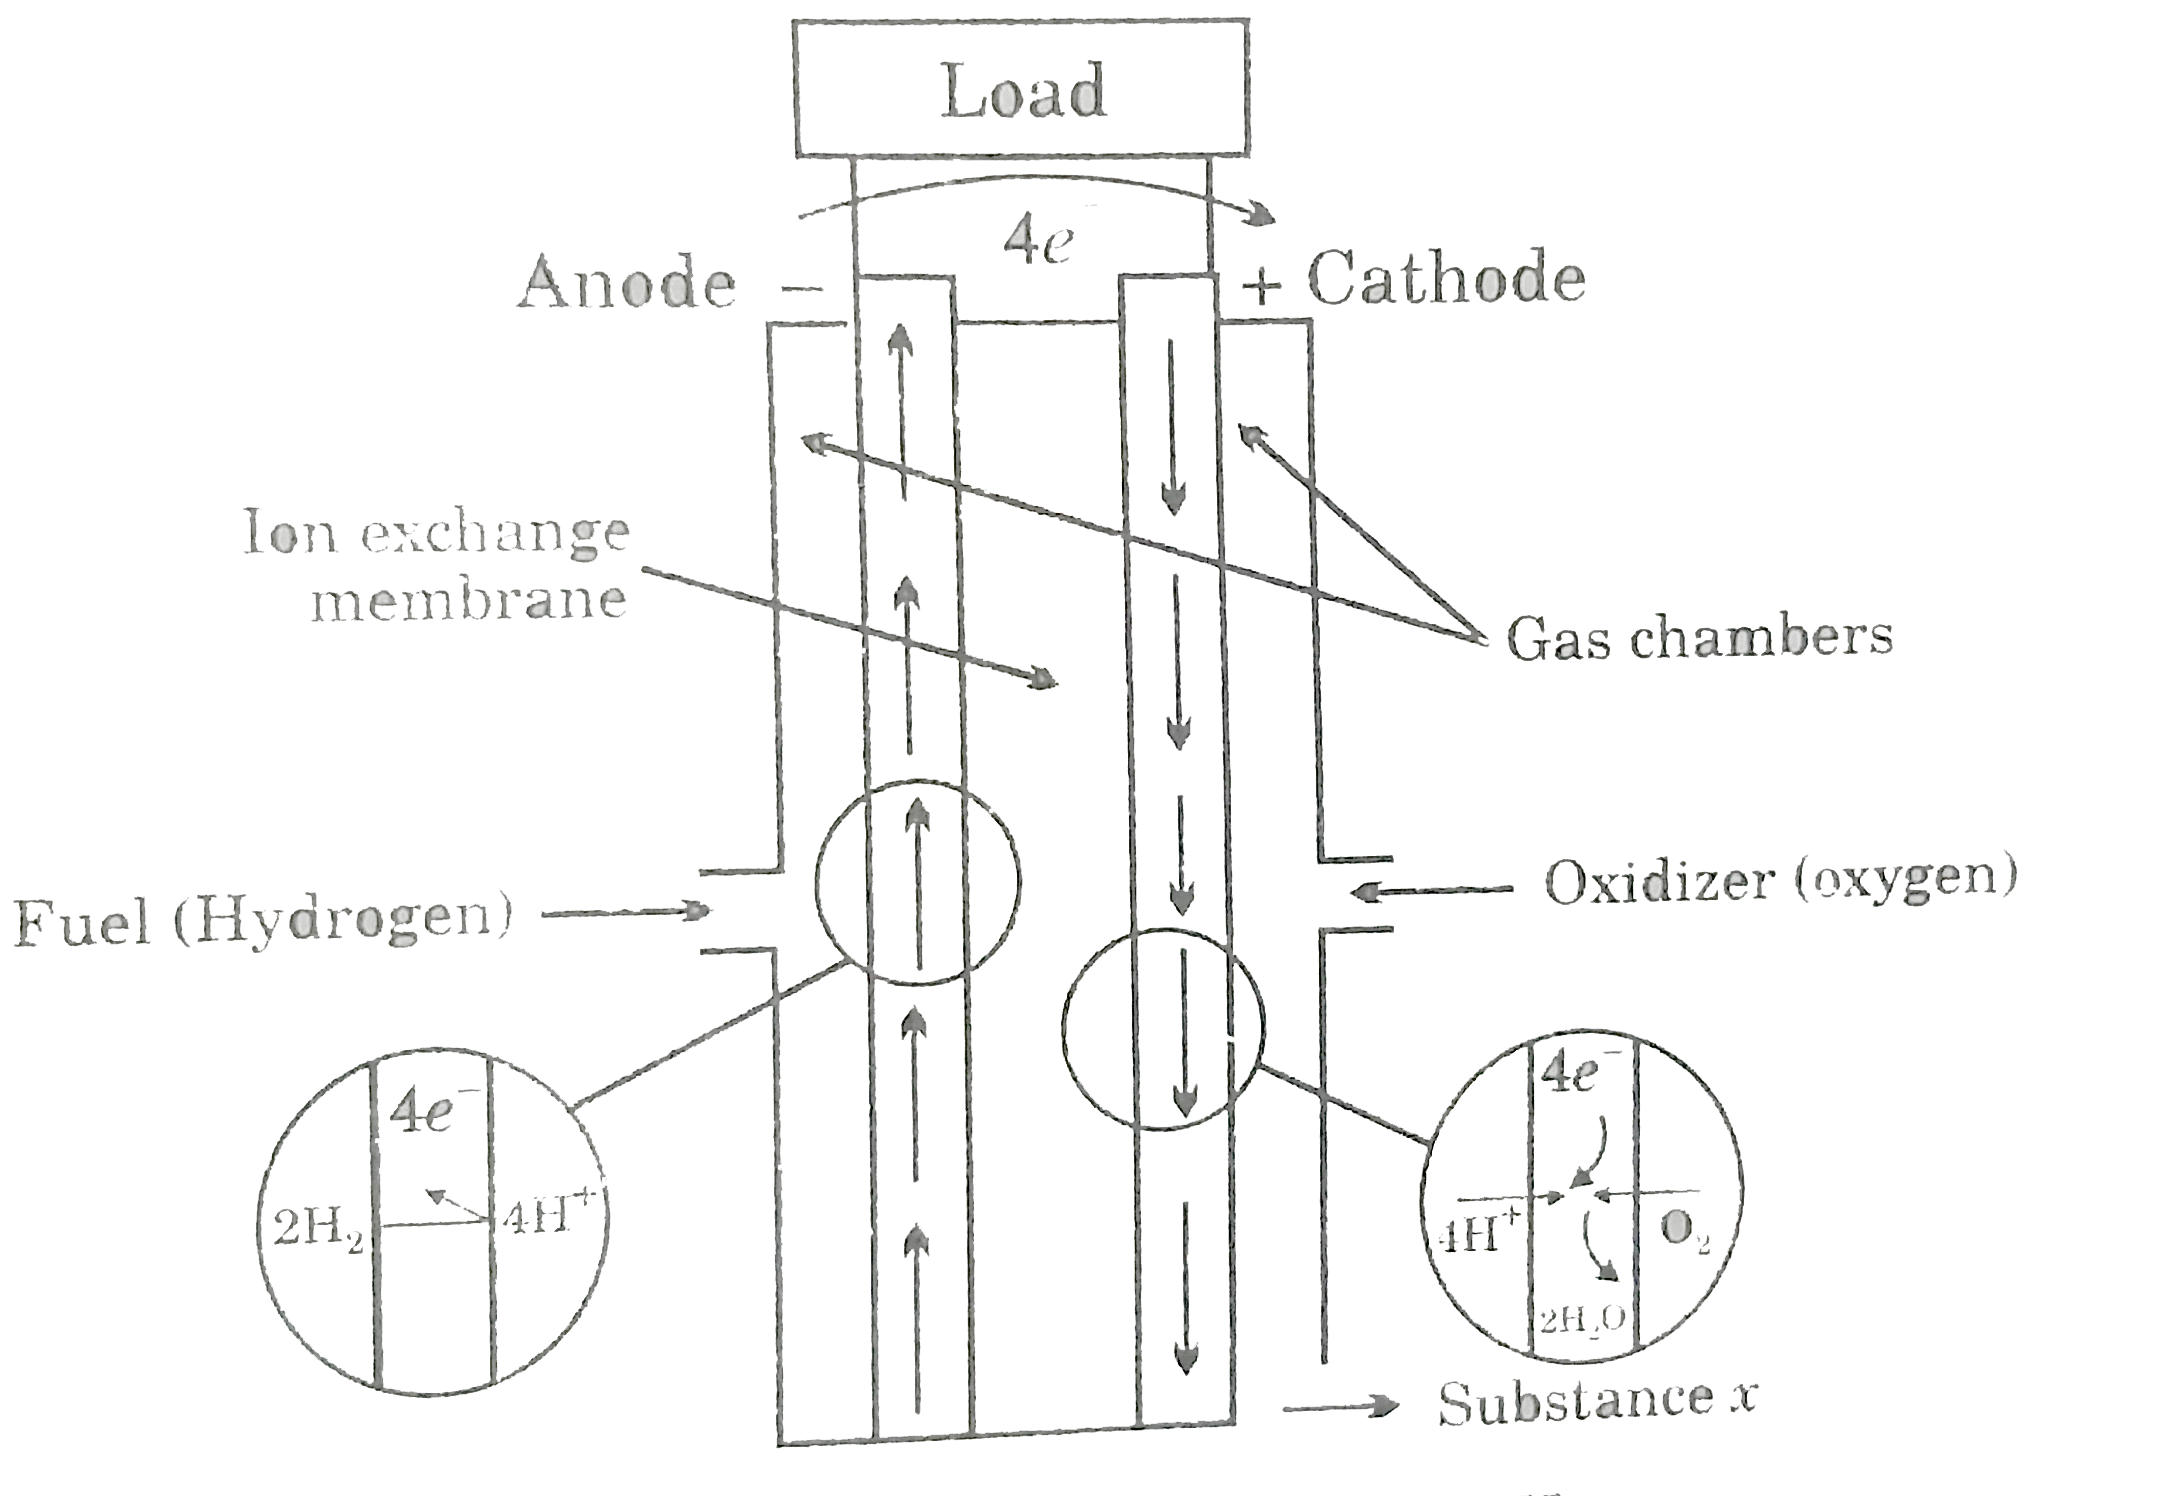 A fuel cell is a cell that is continuously supplied with an oxidant and a reductant so that it can deliver a current indefinitely. Fuel cell offer the possibility of achieving high thermodynamic efficiency in the conversion of Gibbs energy into mechanical work. Internal combustion engines at best convert only the fraction (T(2)-T(1))T(2) of heat of combustion into mechanical work. While the thermodynamic efficiency of the fuel cell is give by, eta=(|DeltaG|)/(|DeltaH|), where DeltaG is the Gibbs energy change for the cell reaction and DeltaH is the enthalpy change of the cell reaction. This efficiency can be upto 80%-90% also in contrast to normal heat engine efficiency which are generally about 40%      Fuel cells may be classified according to the temperature range in wich they operate low temperature (25 to 100^(@)C), medium temperature (100 to 500^(@)C)), high temperature (500